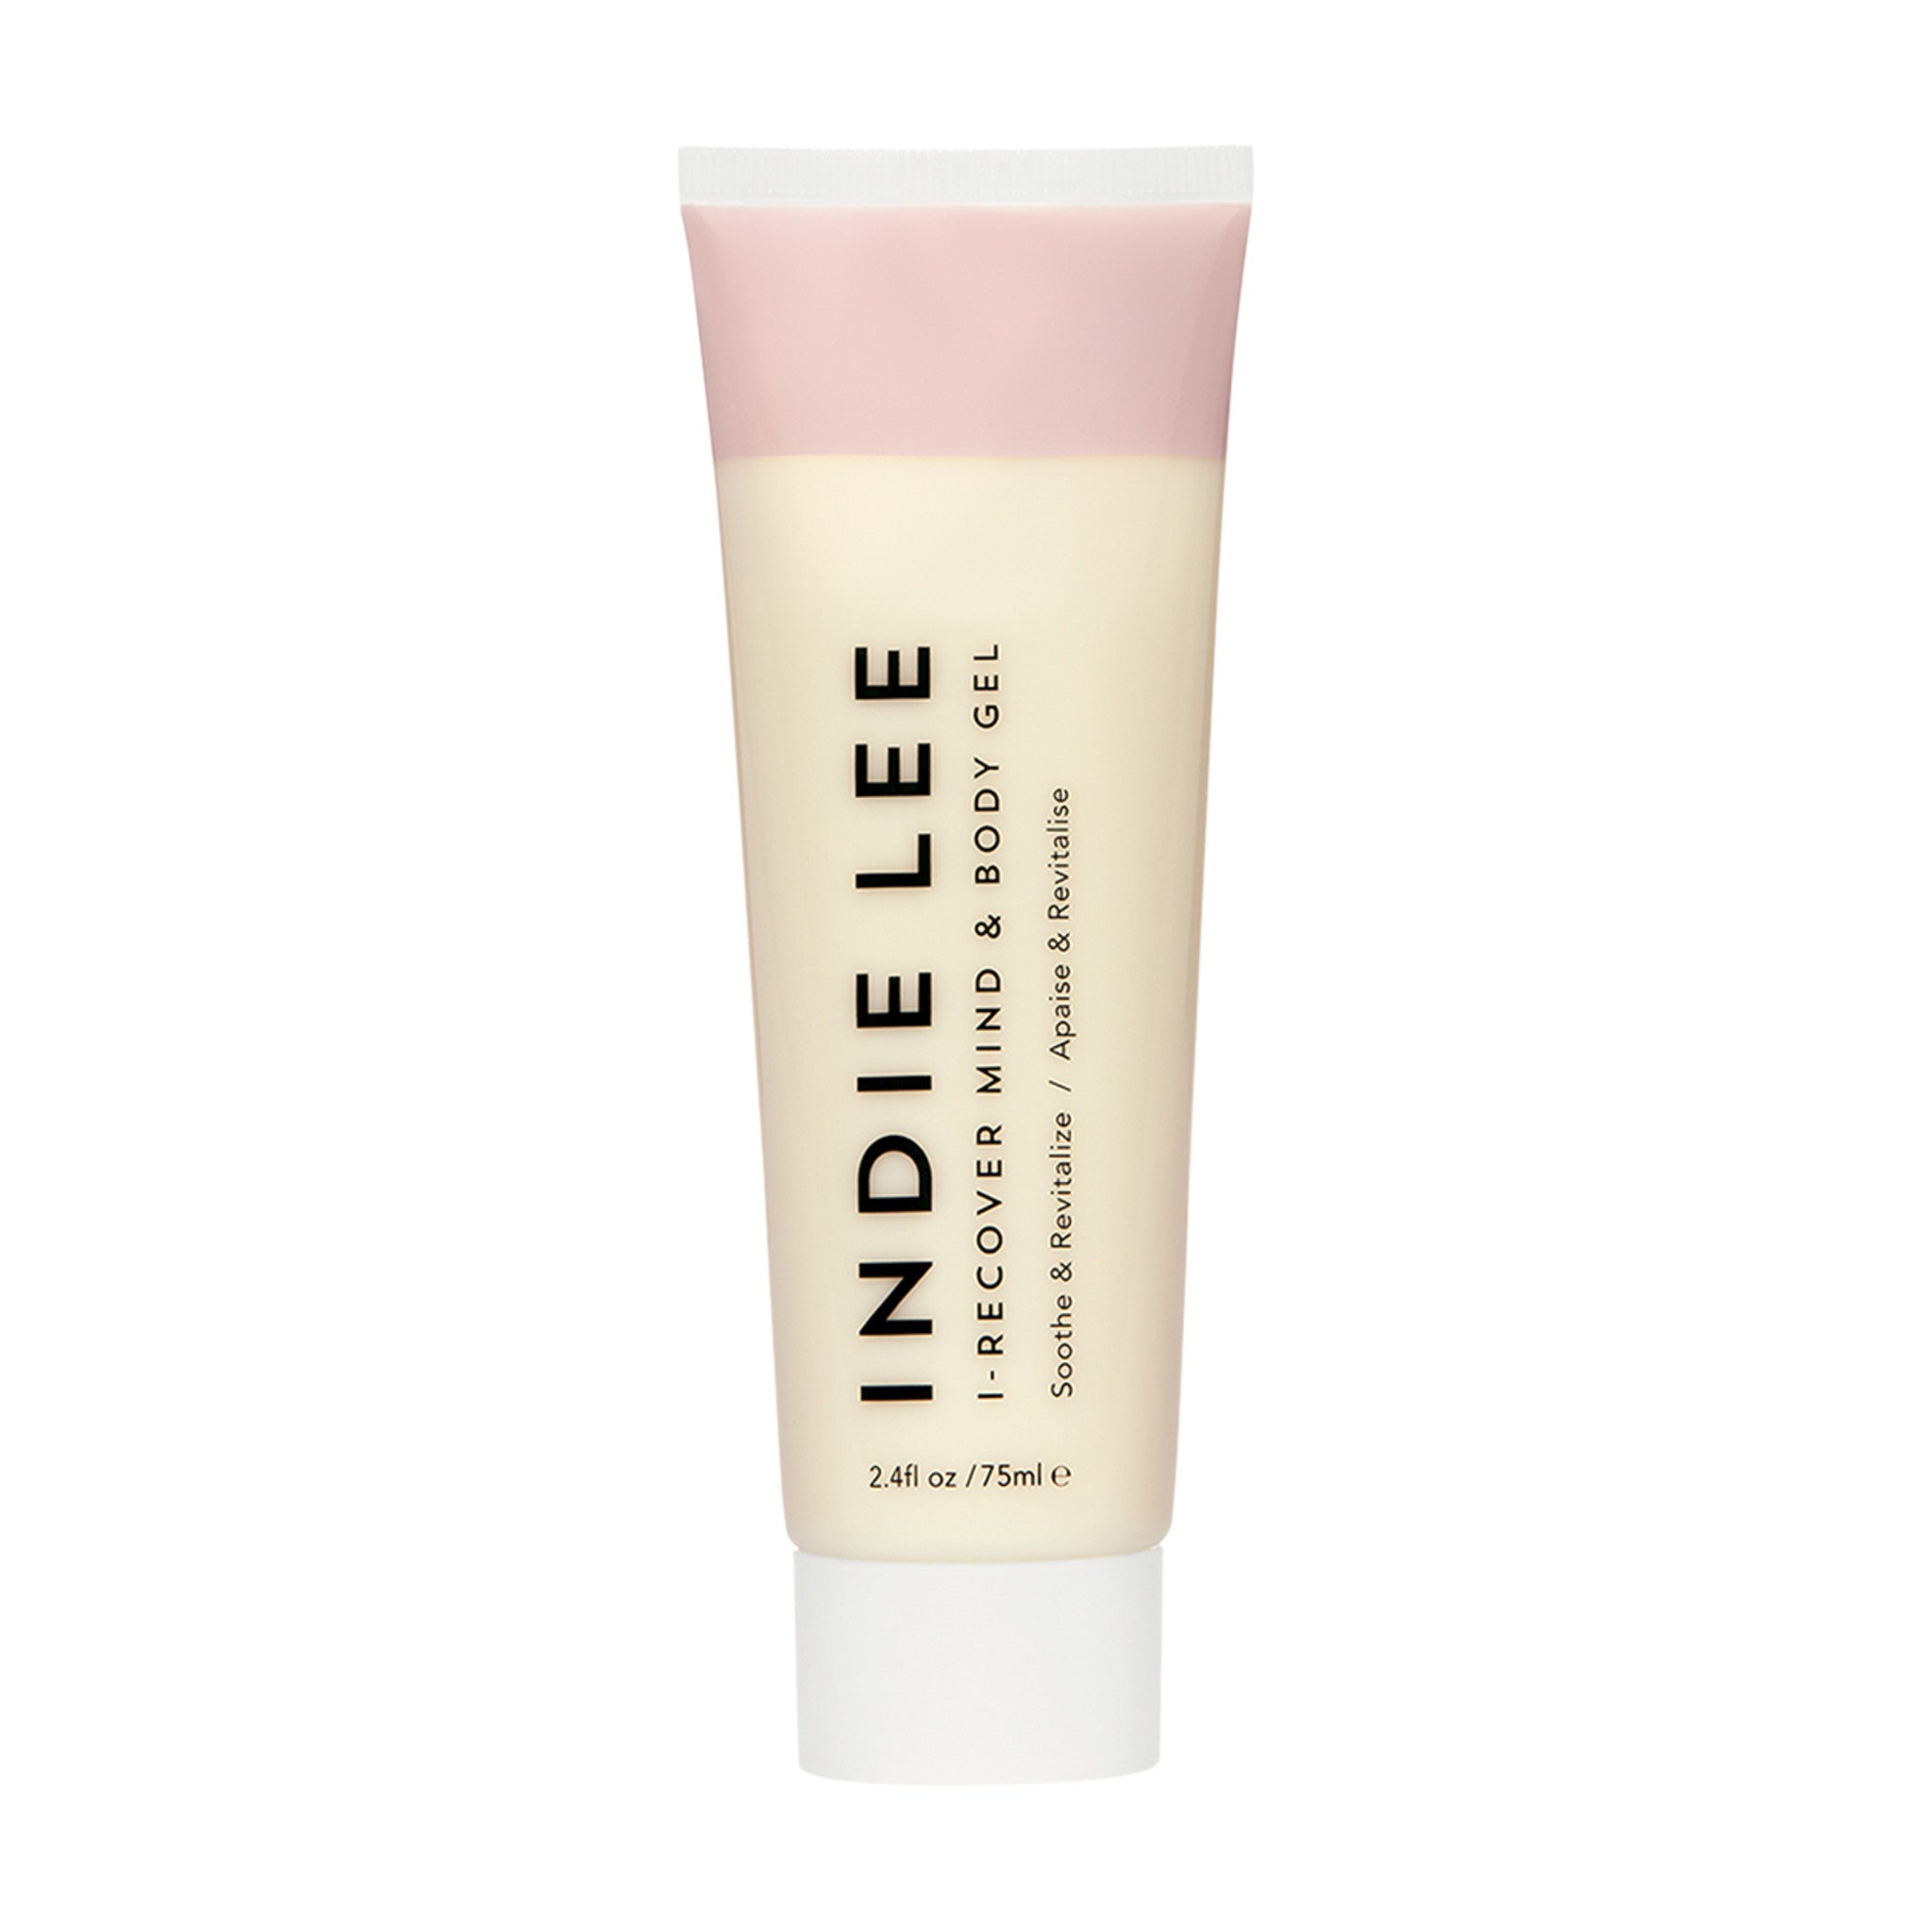 Indie Lee I-Recover Mind and Body Gel main image.